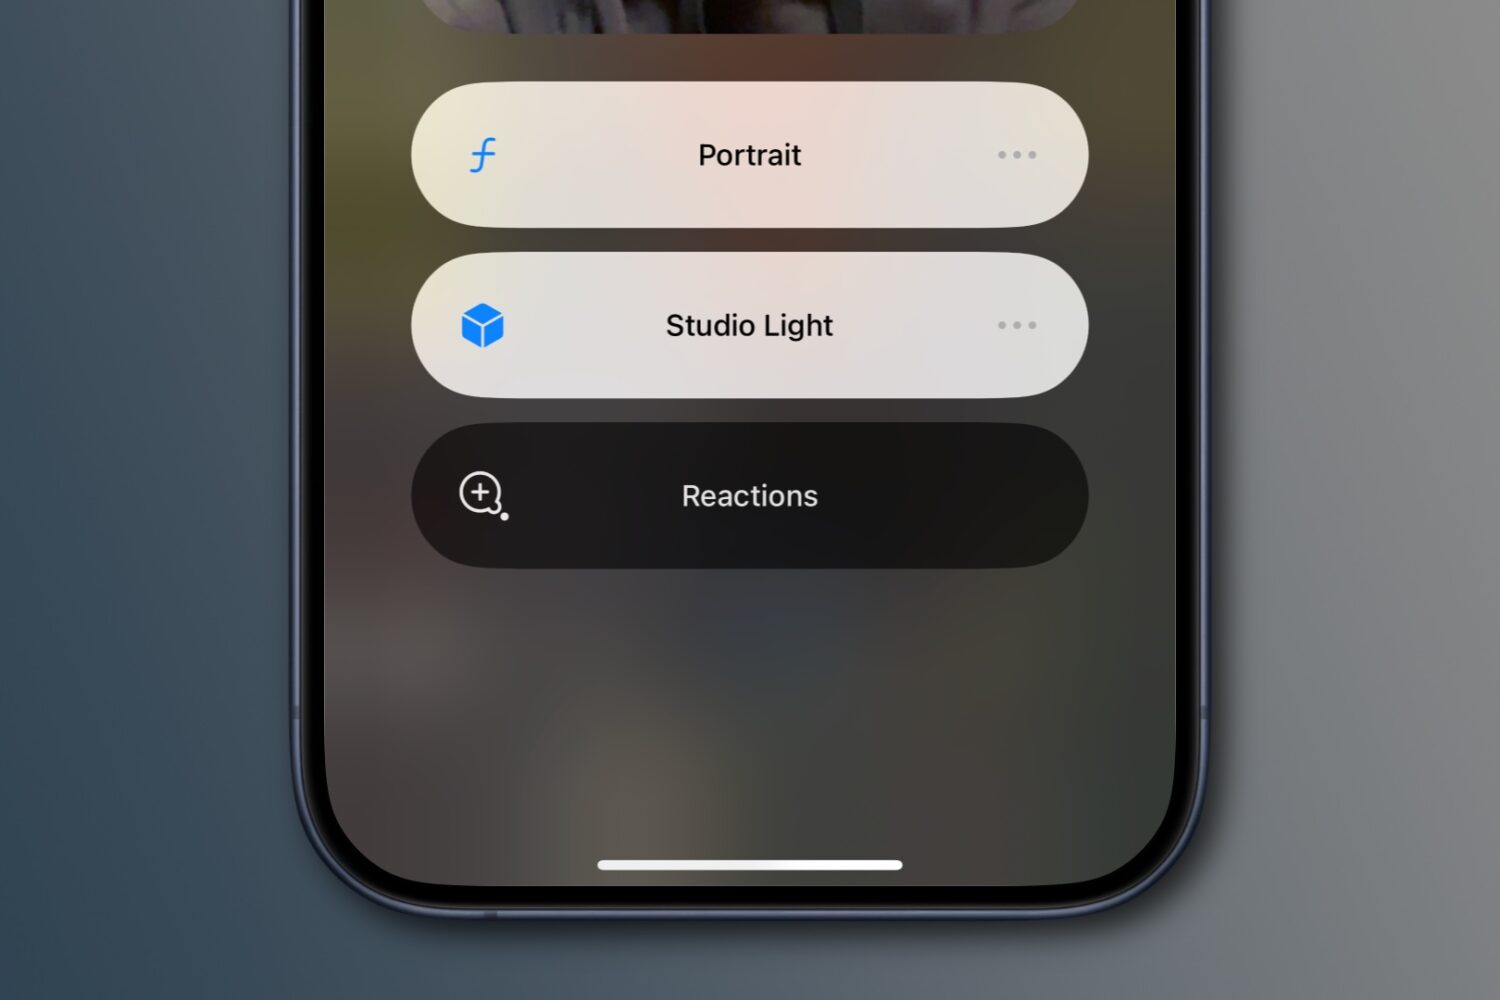 The Video Effects menu in the iPhone's Control Center with the Reactions option disabled